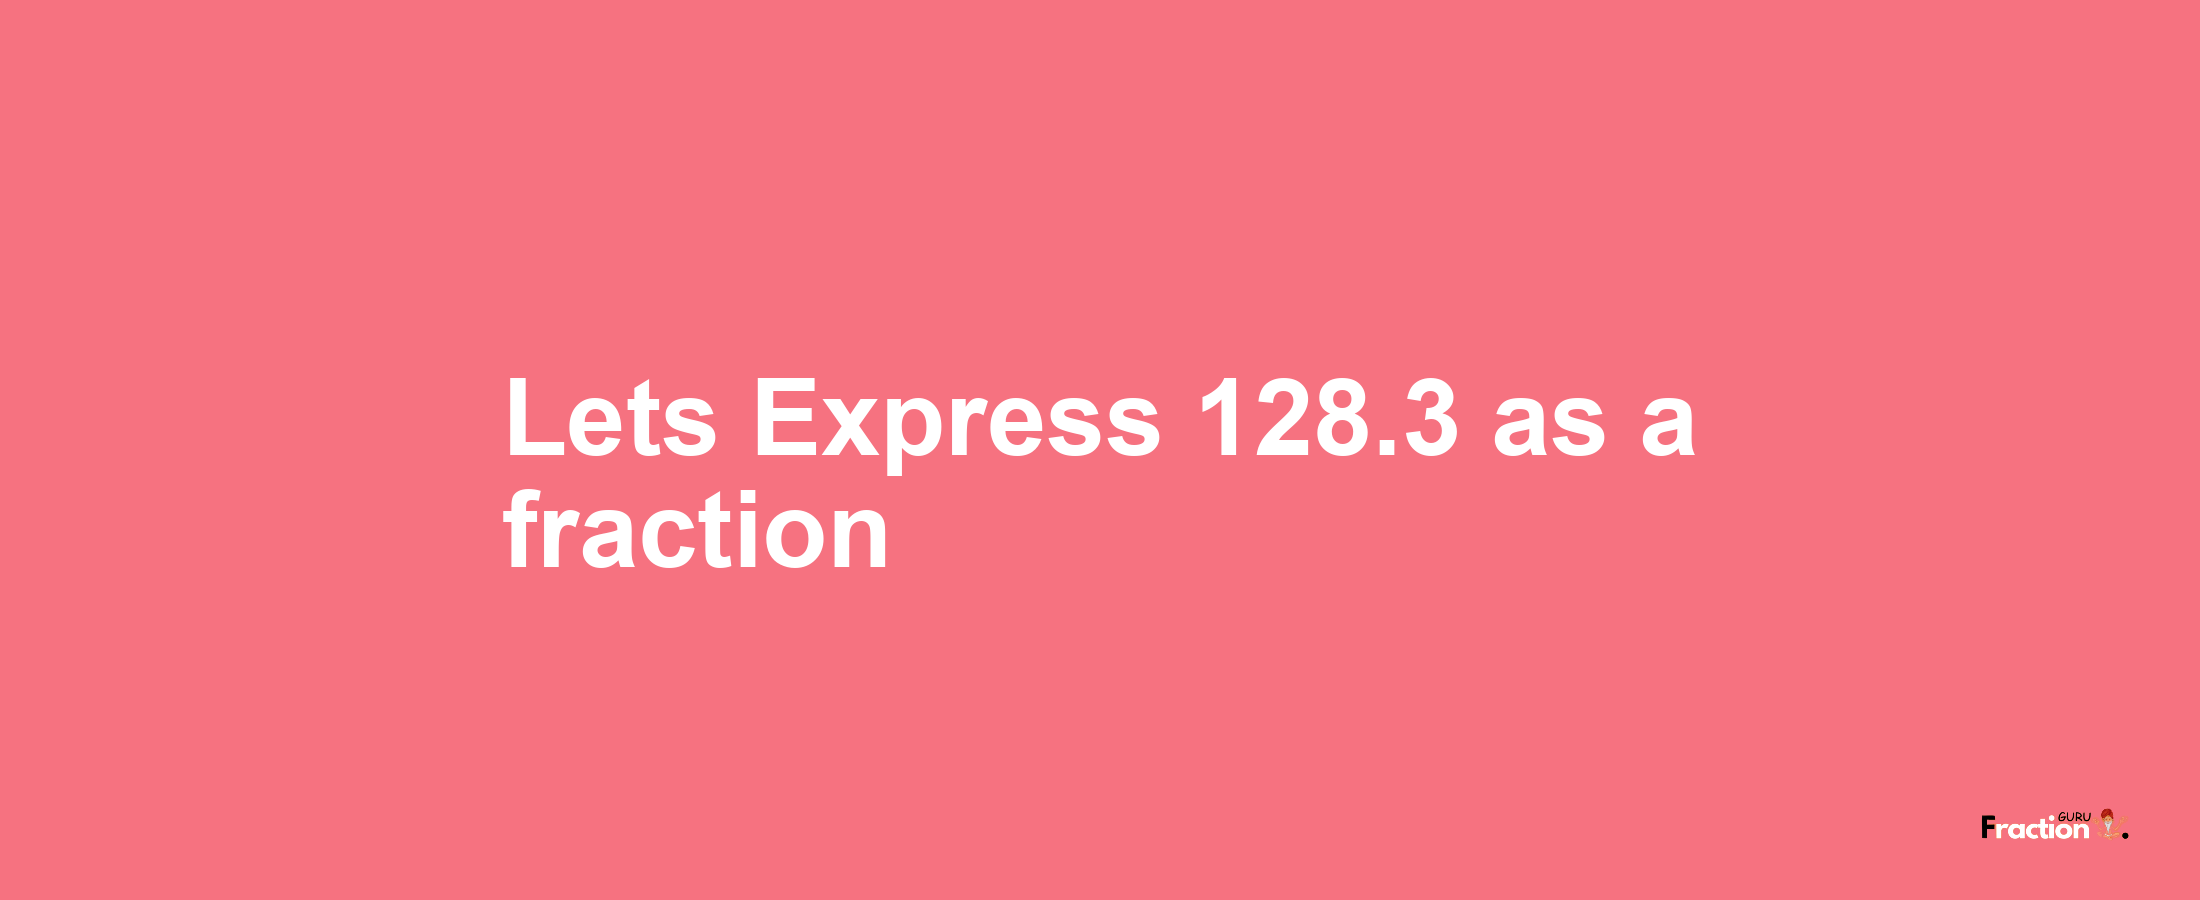 Lets Express 128.3 as afraction